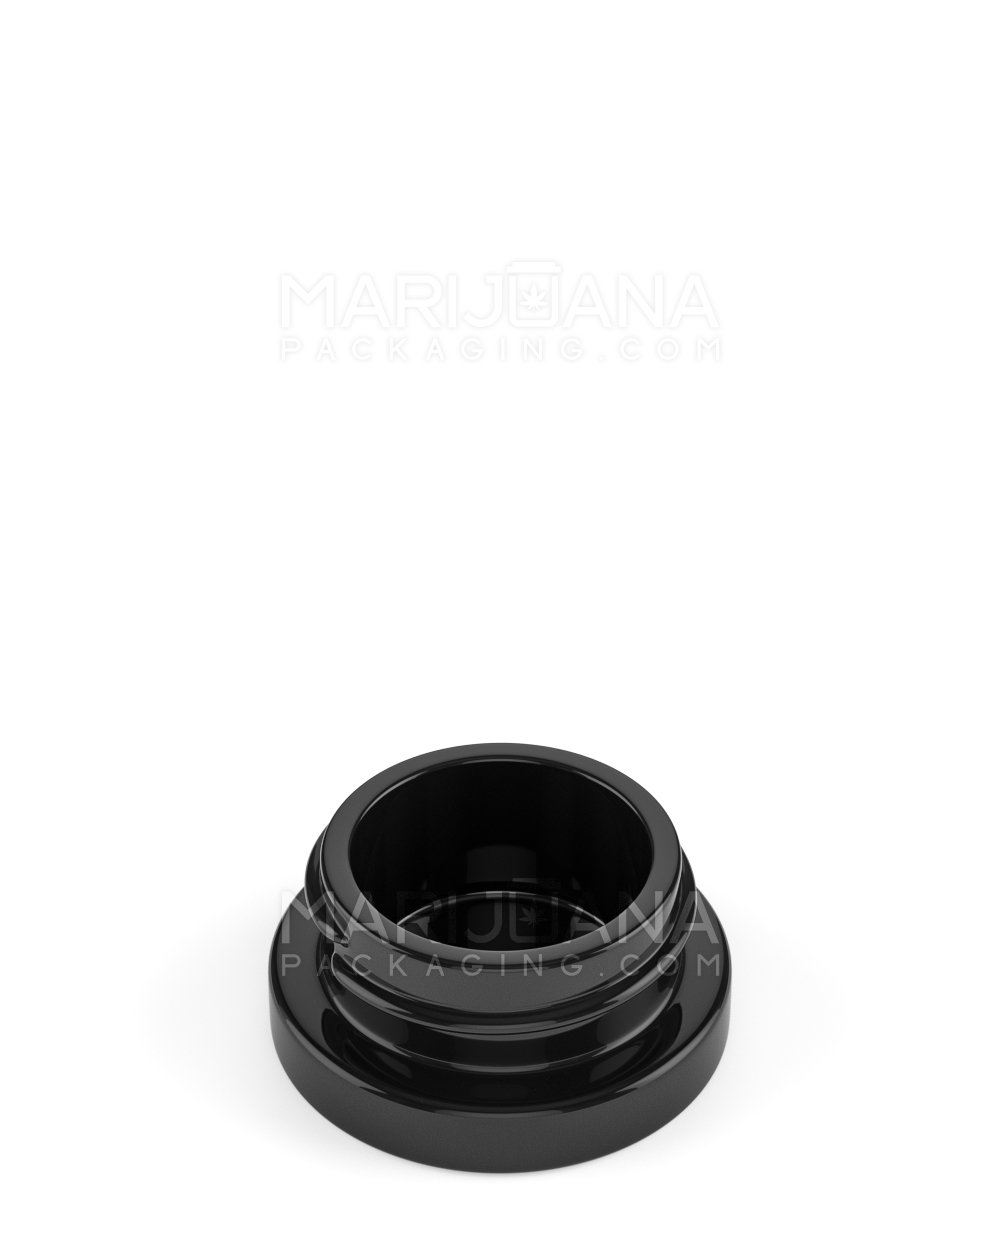 Glossy Black Glass Concentrate Containers | 38mm - 9mL - 320 Count - 2